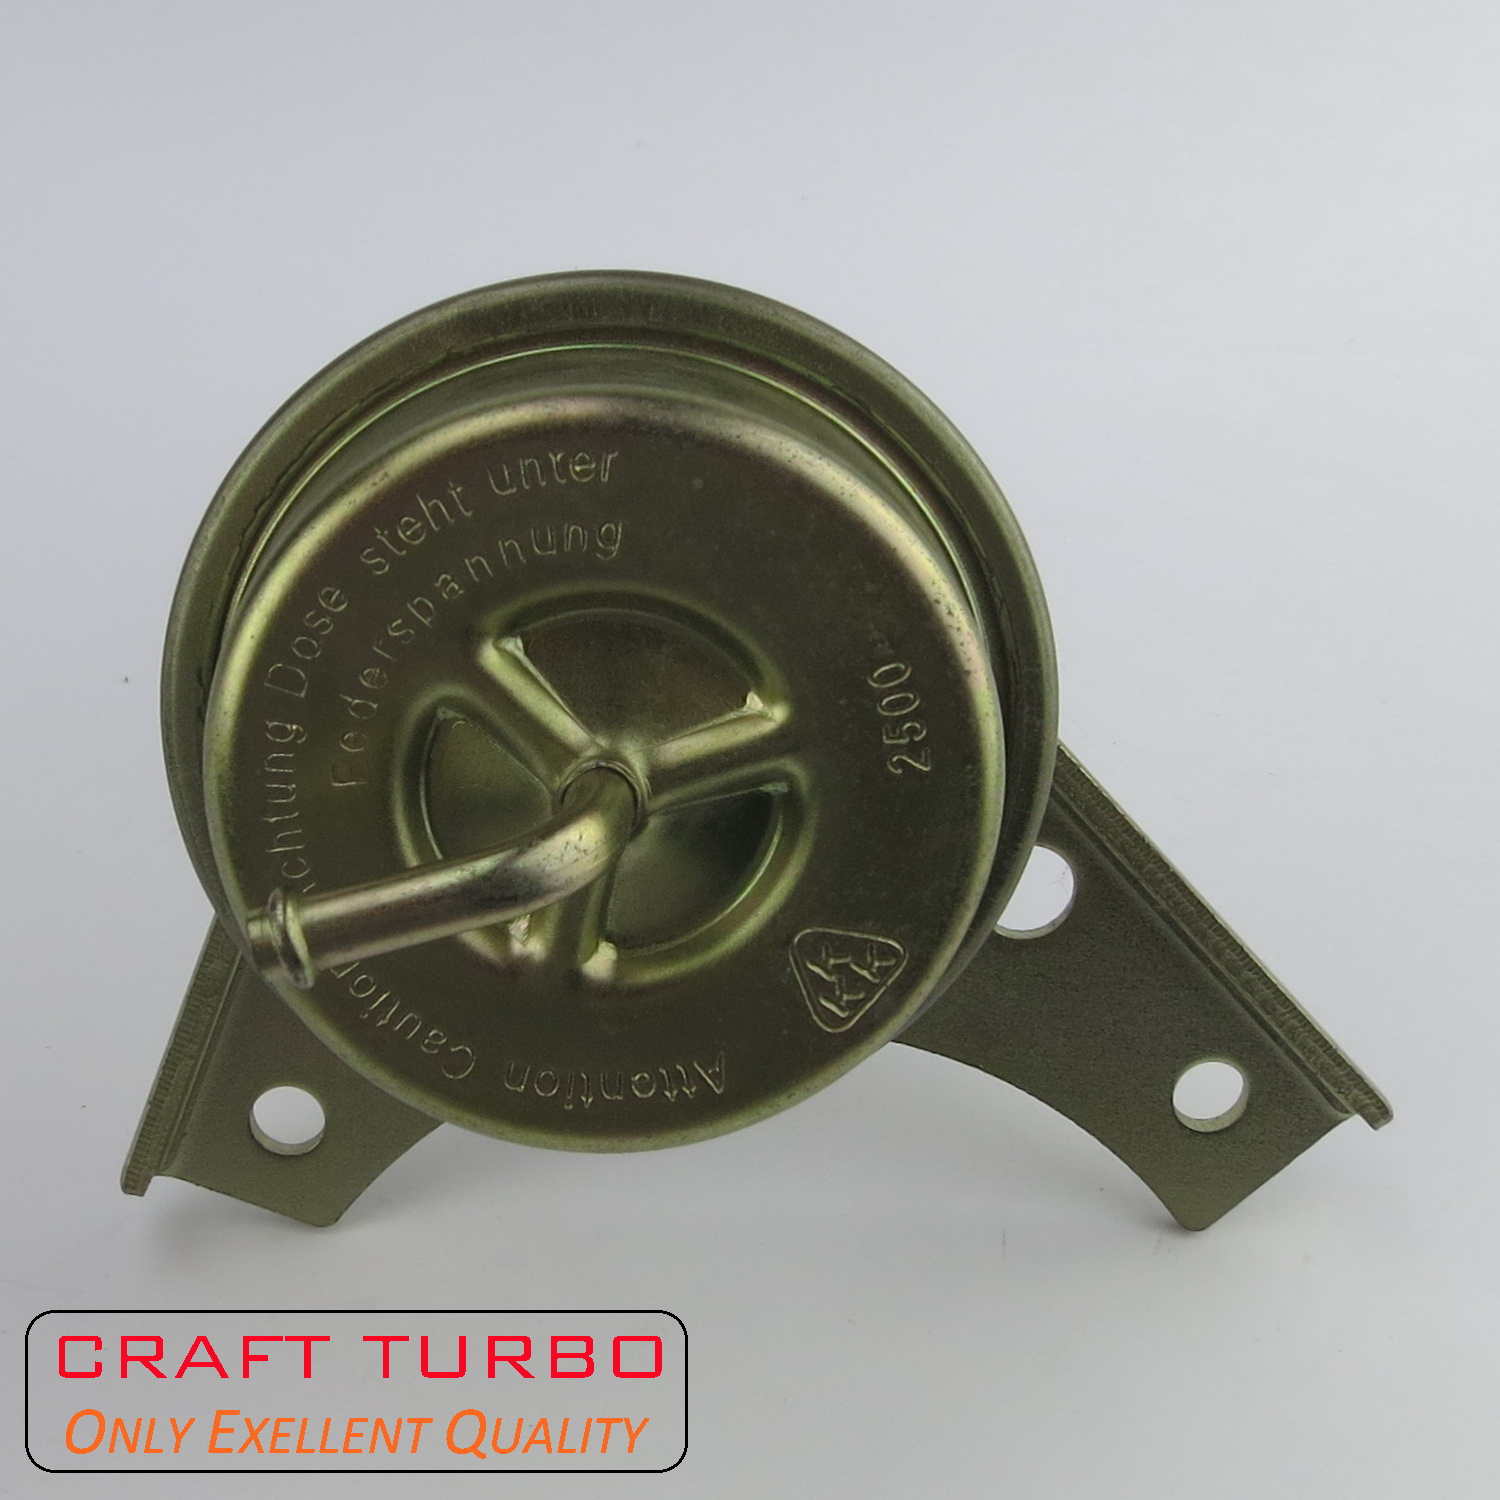 K03 Actuator for Turbochargers